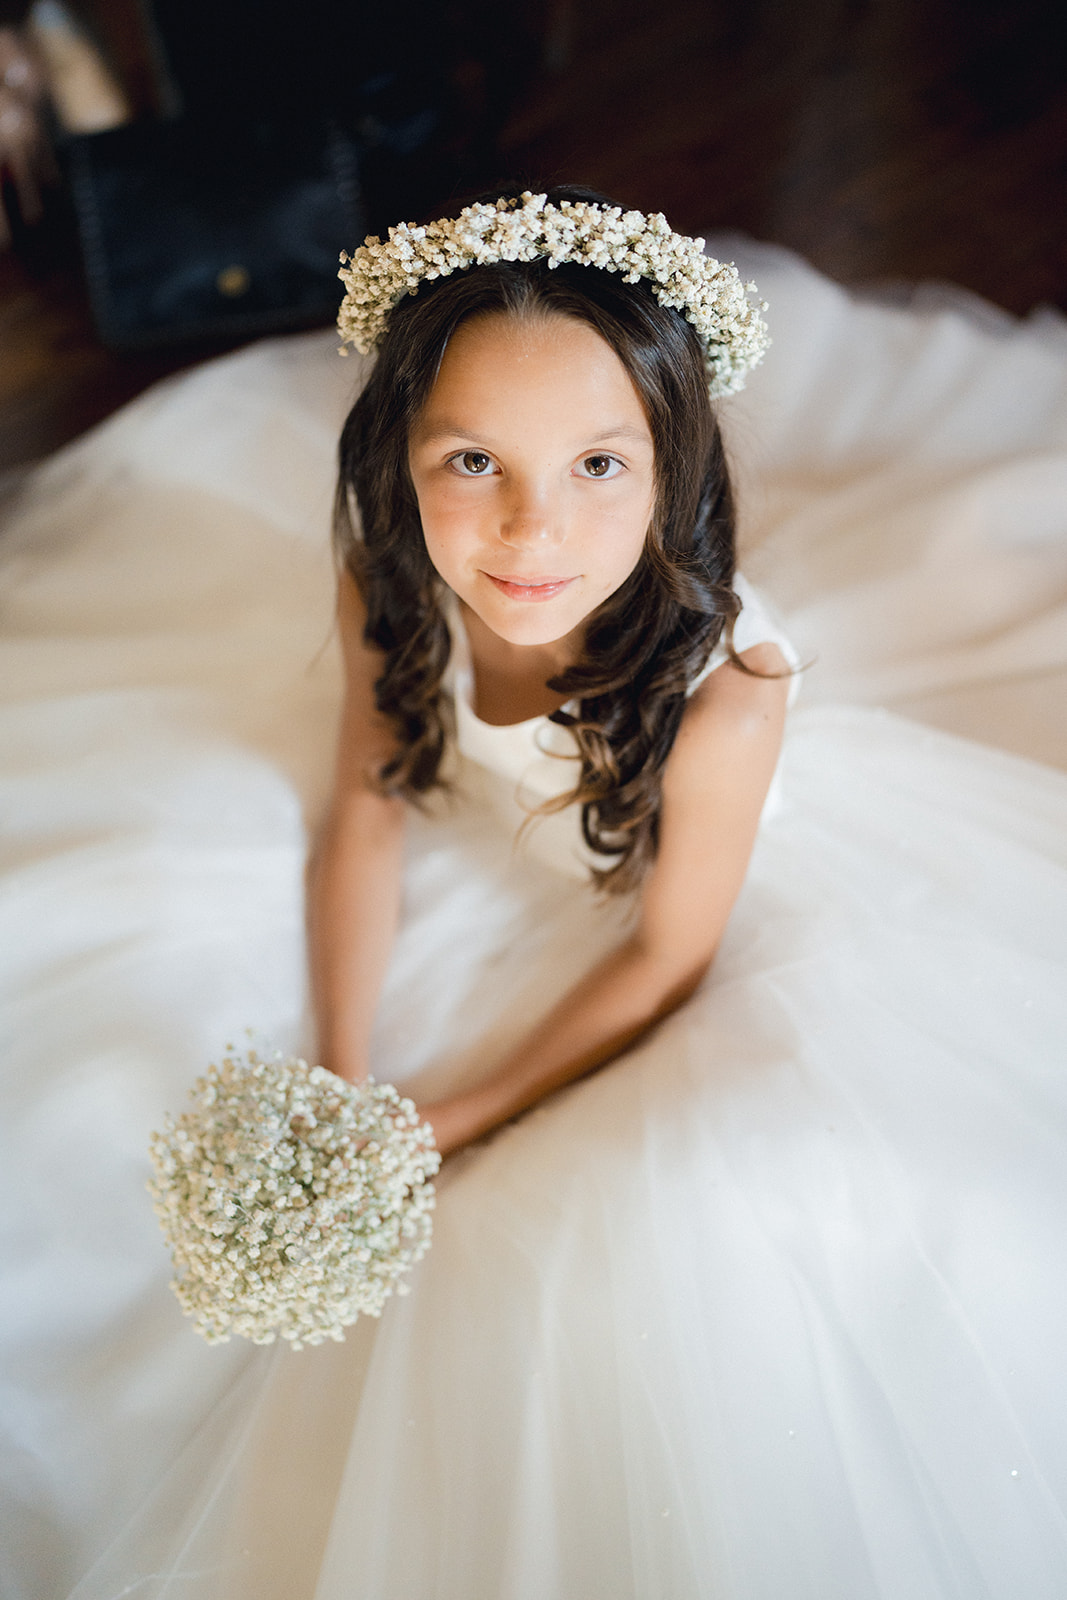 The flower crown on the dress of the little flower girl